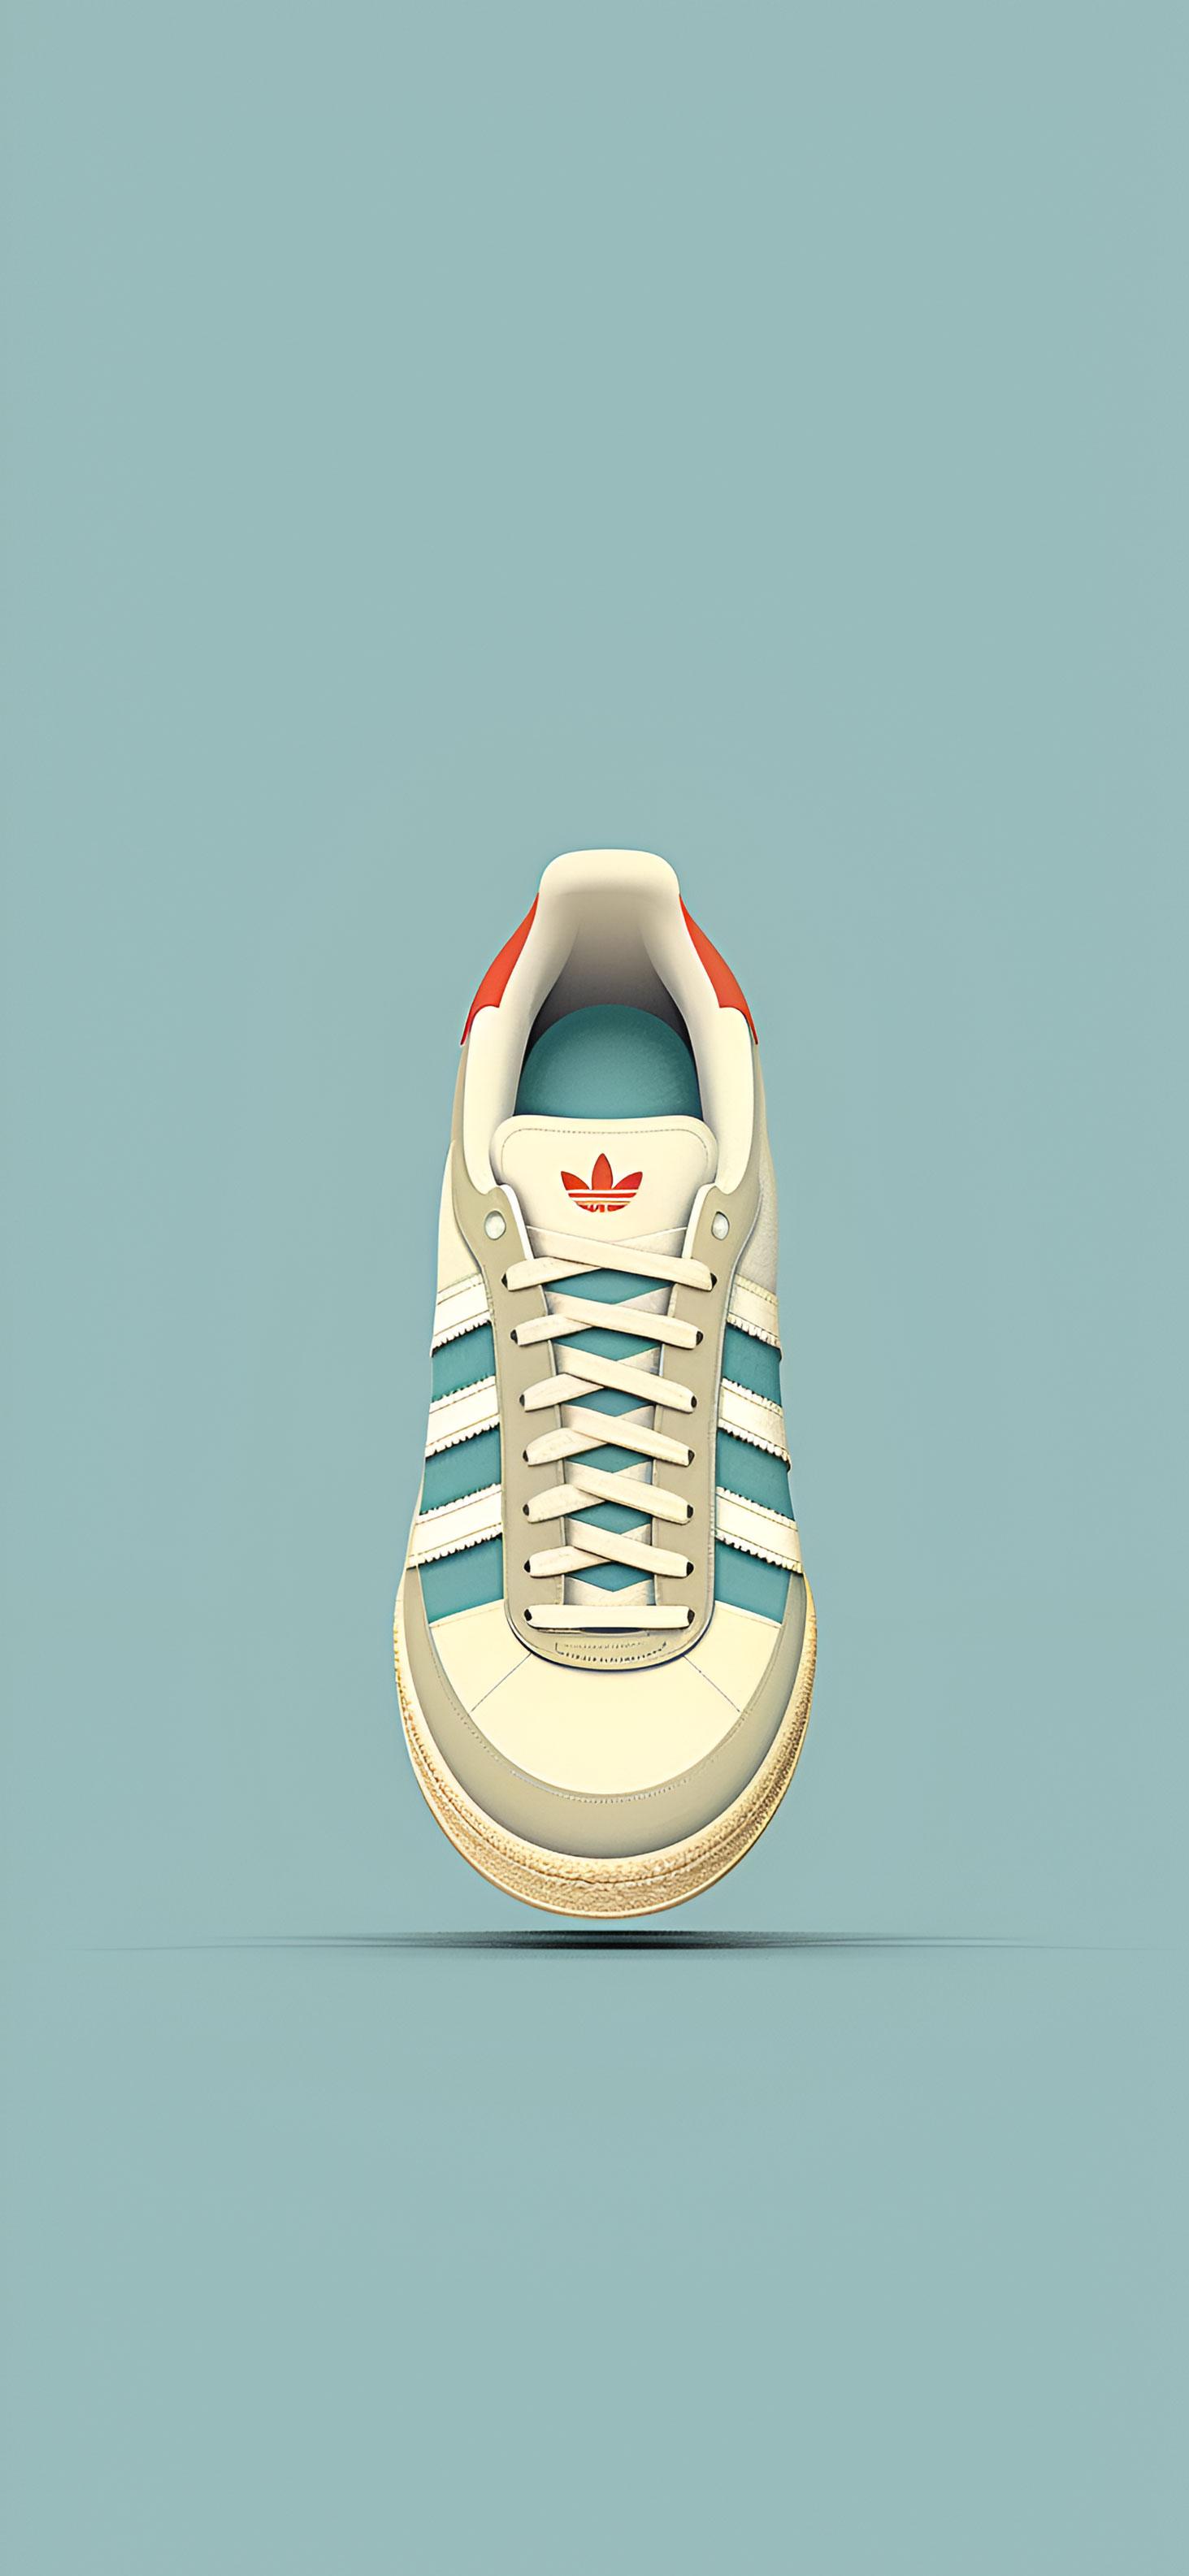 Adidas Rivalry Low Shoes Light Blue Wallpaper